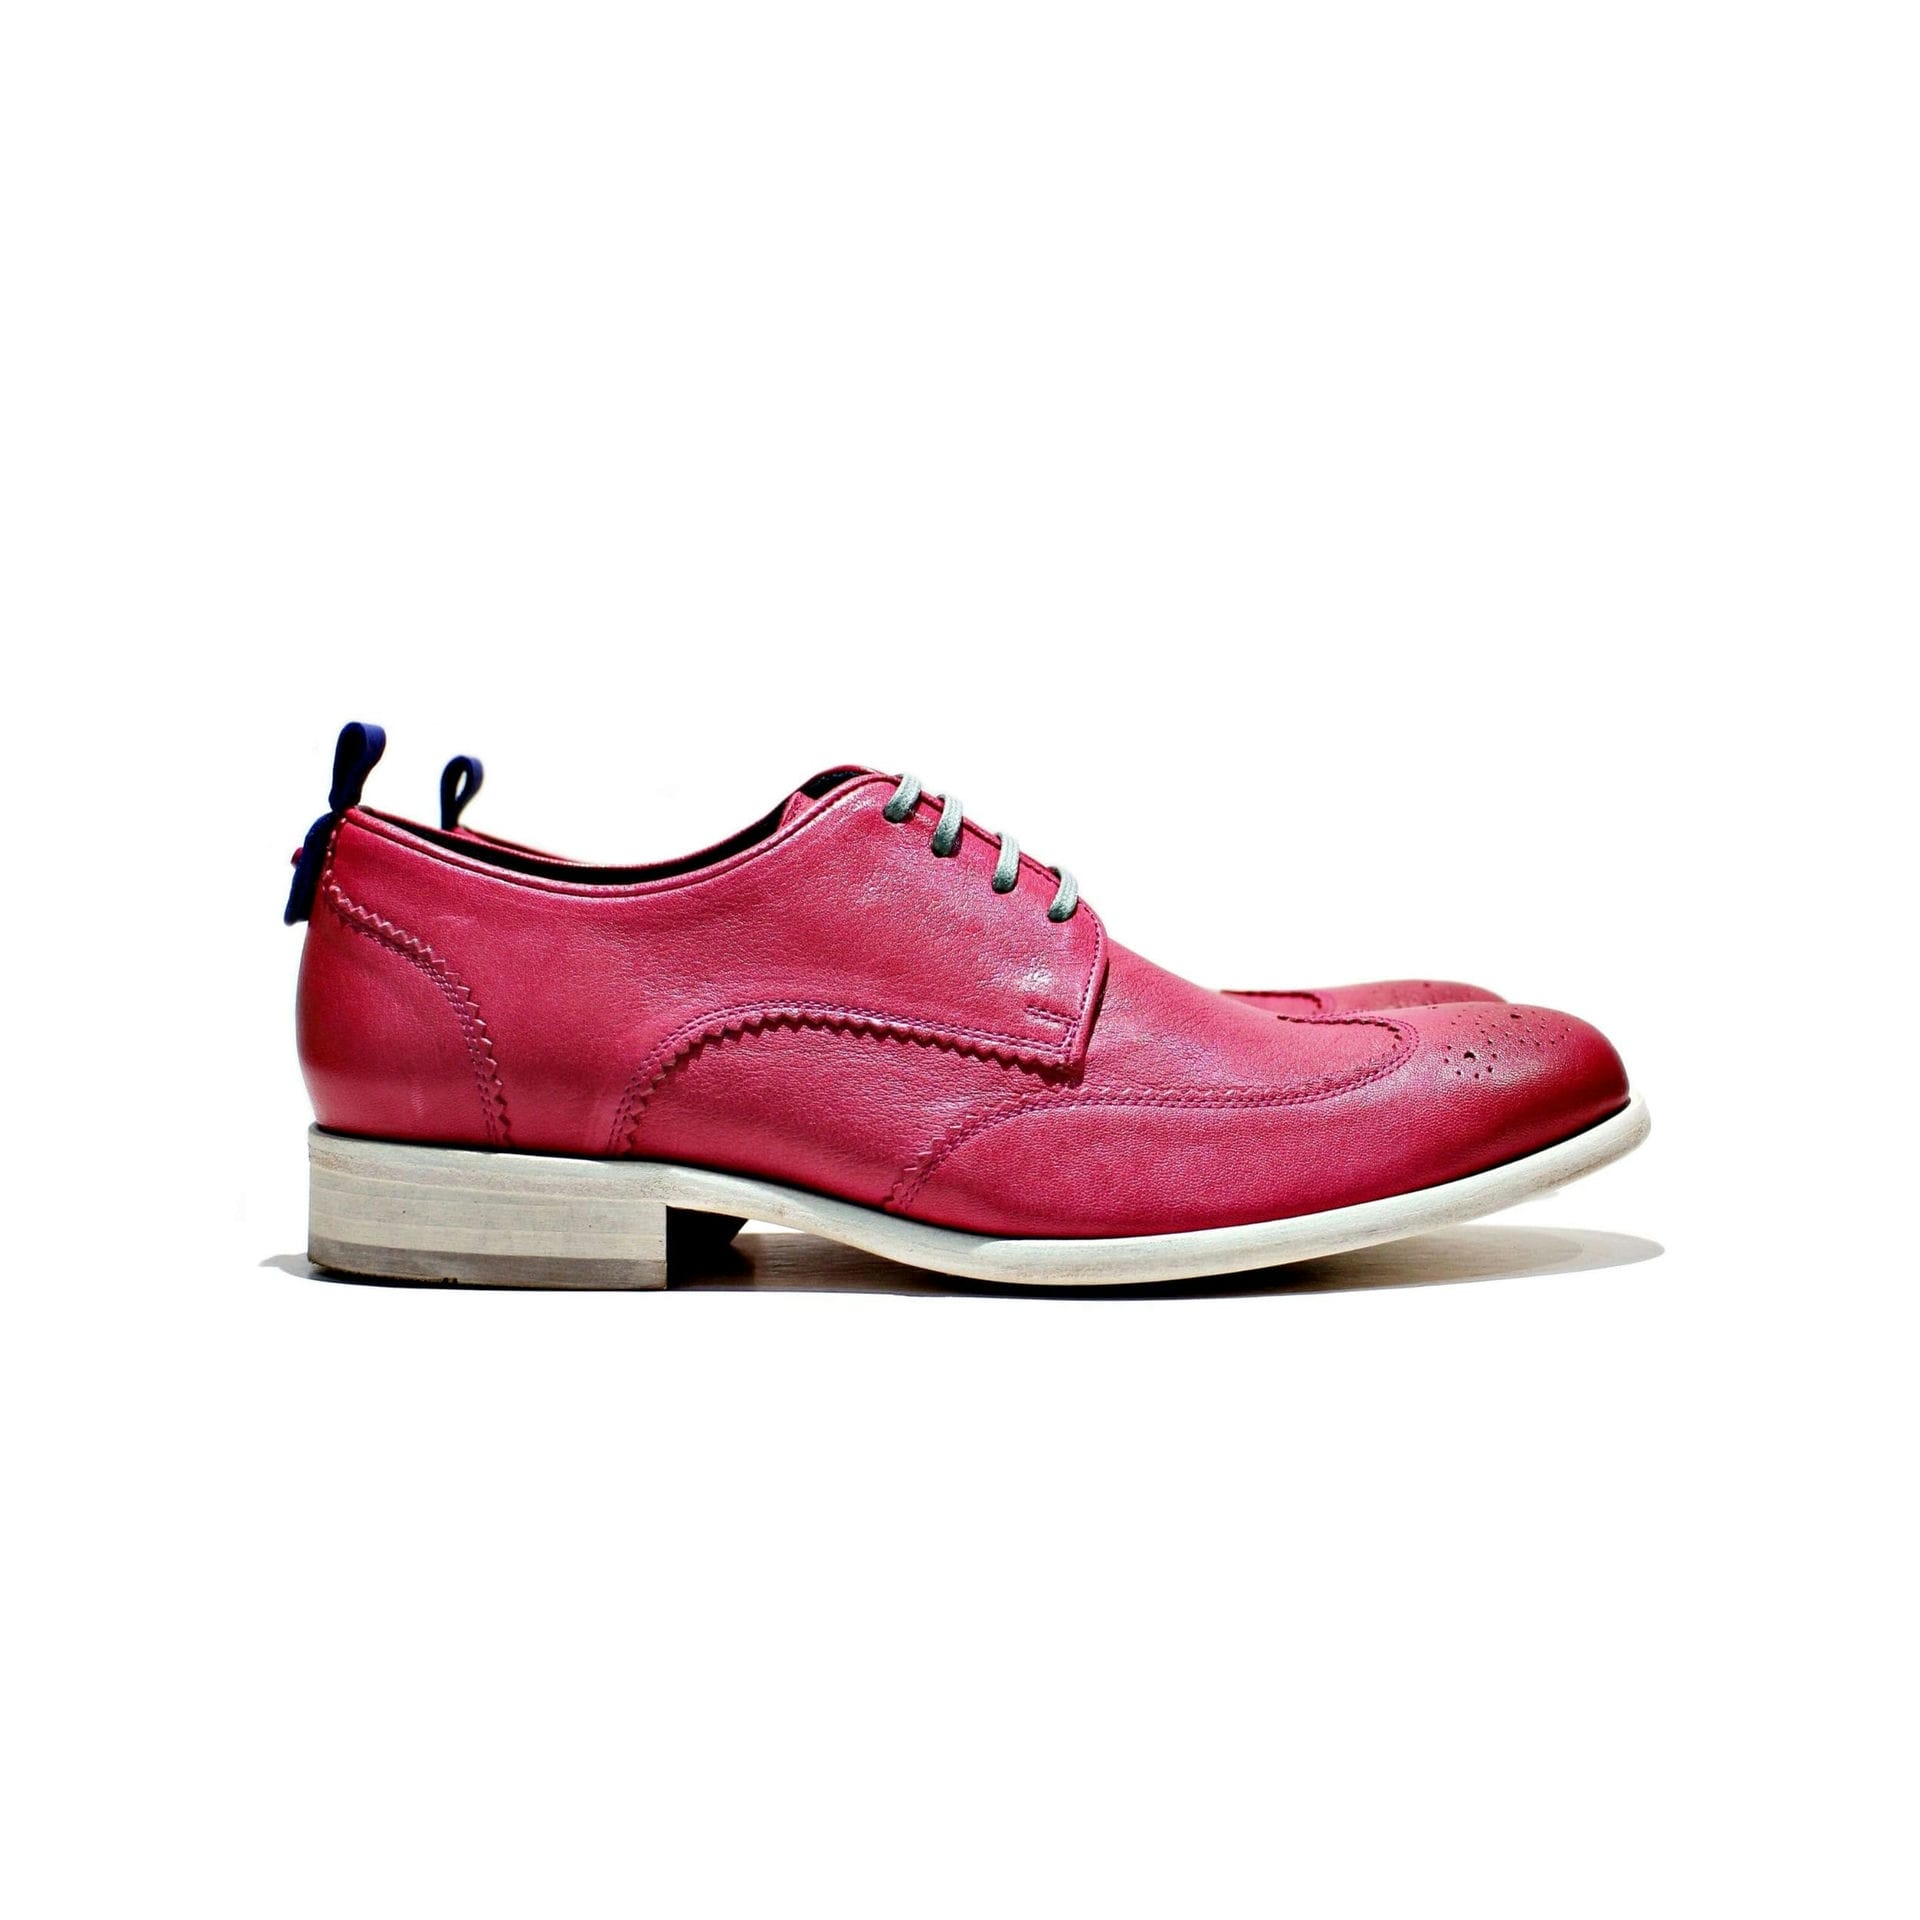 All leather shoe, for an exclusive look, model Incon. Handmade in Portugal. . “Walk with Pintta”